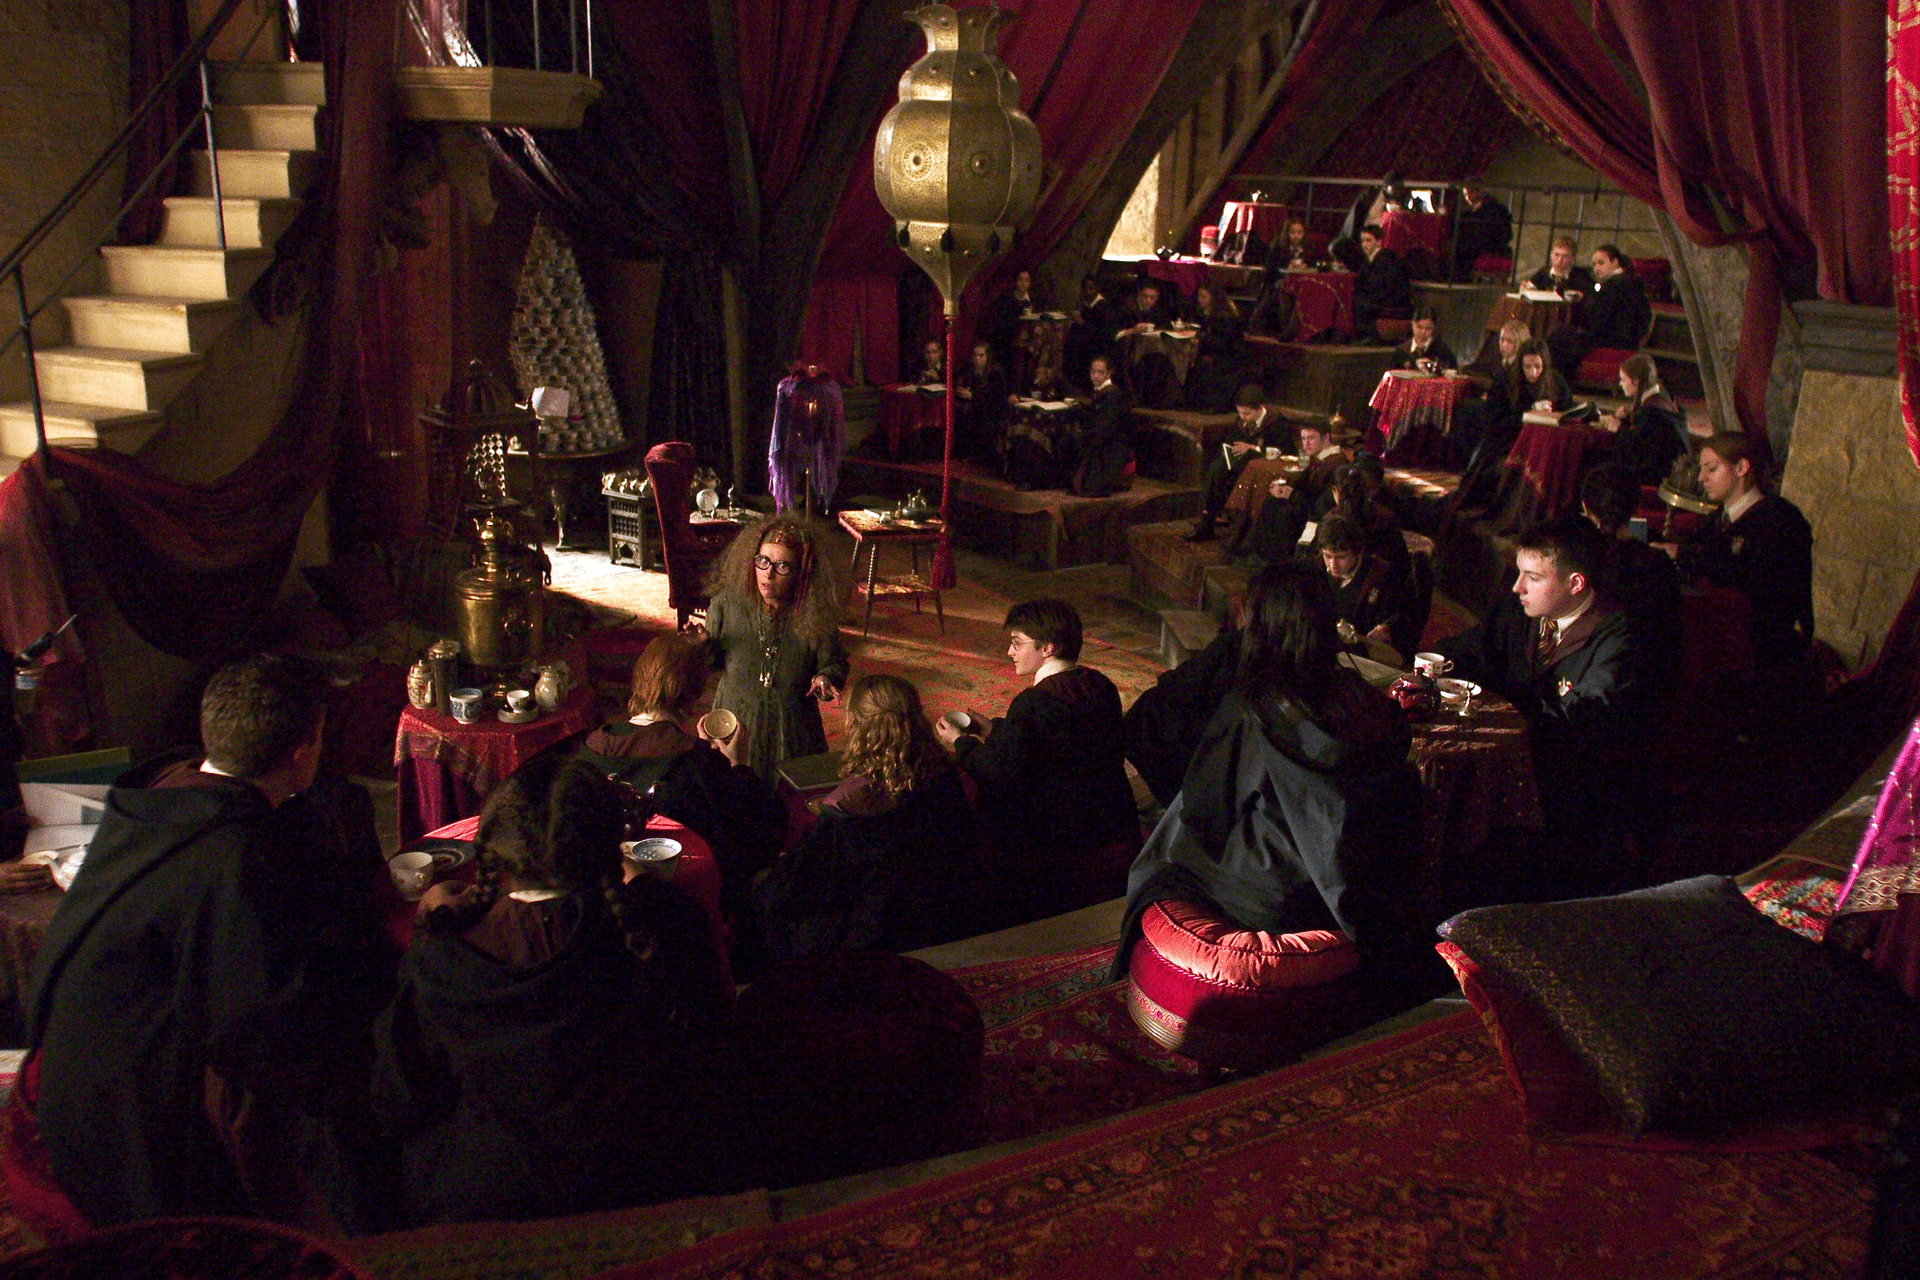 The Divination classroom, as featured in Harry Potter and the Prisoner of Azkaban